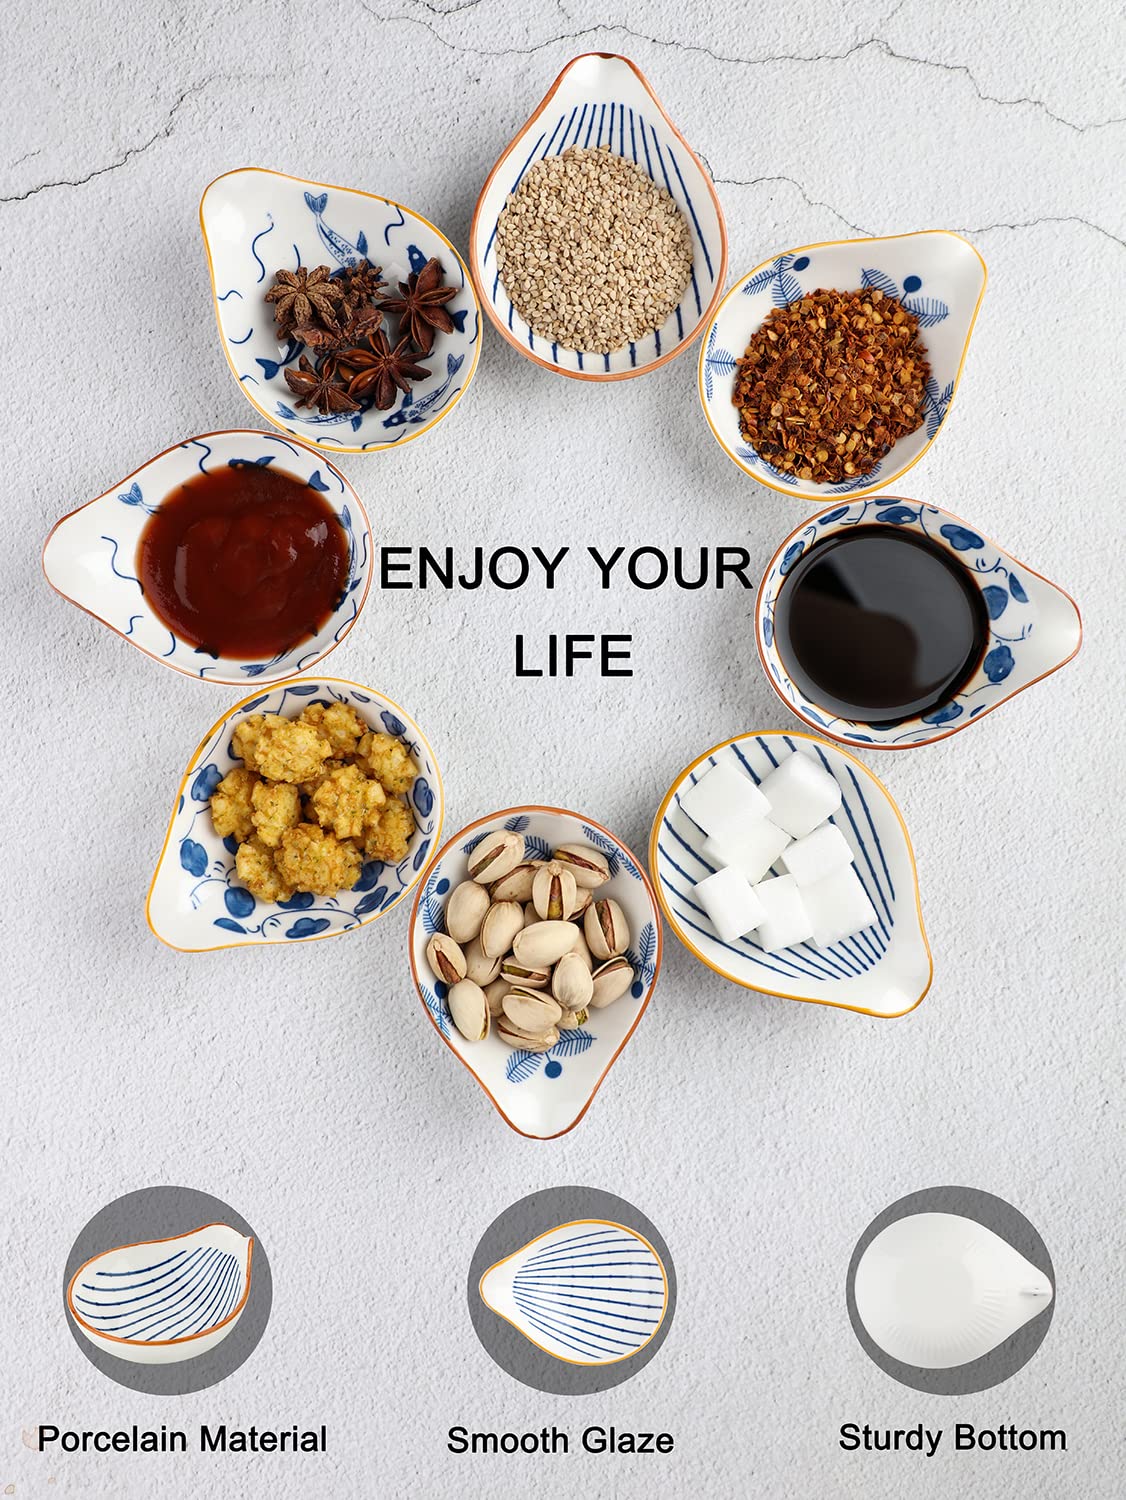 Evannt Dipping Sauce Bowls Ceramic Soy Sauce Dish Set of 8 Condiments Seasoning Dishes Side Dishes